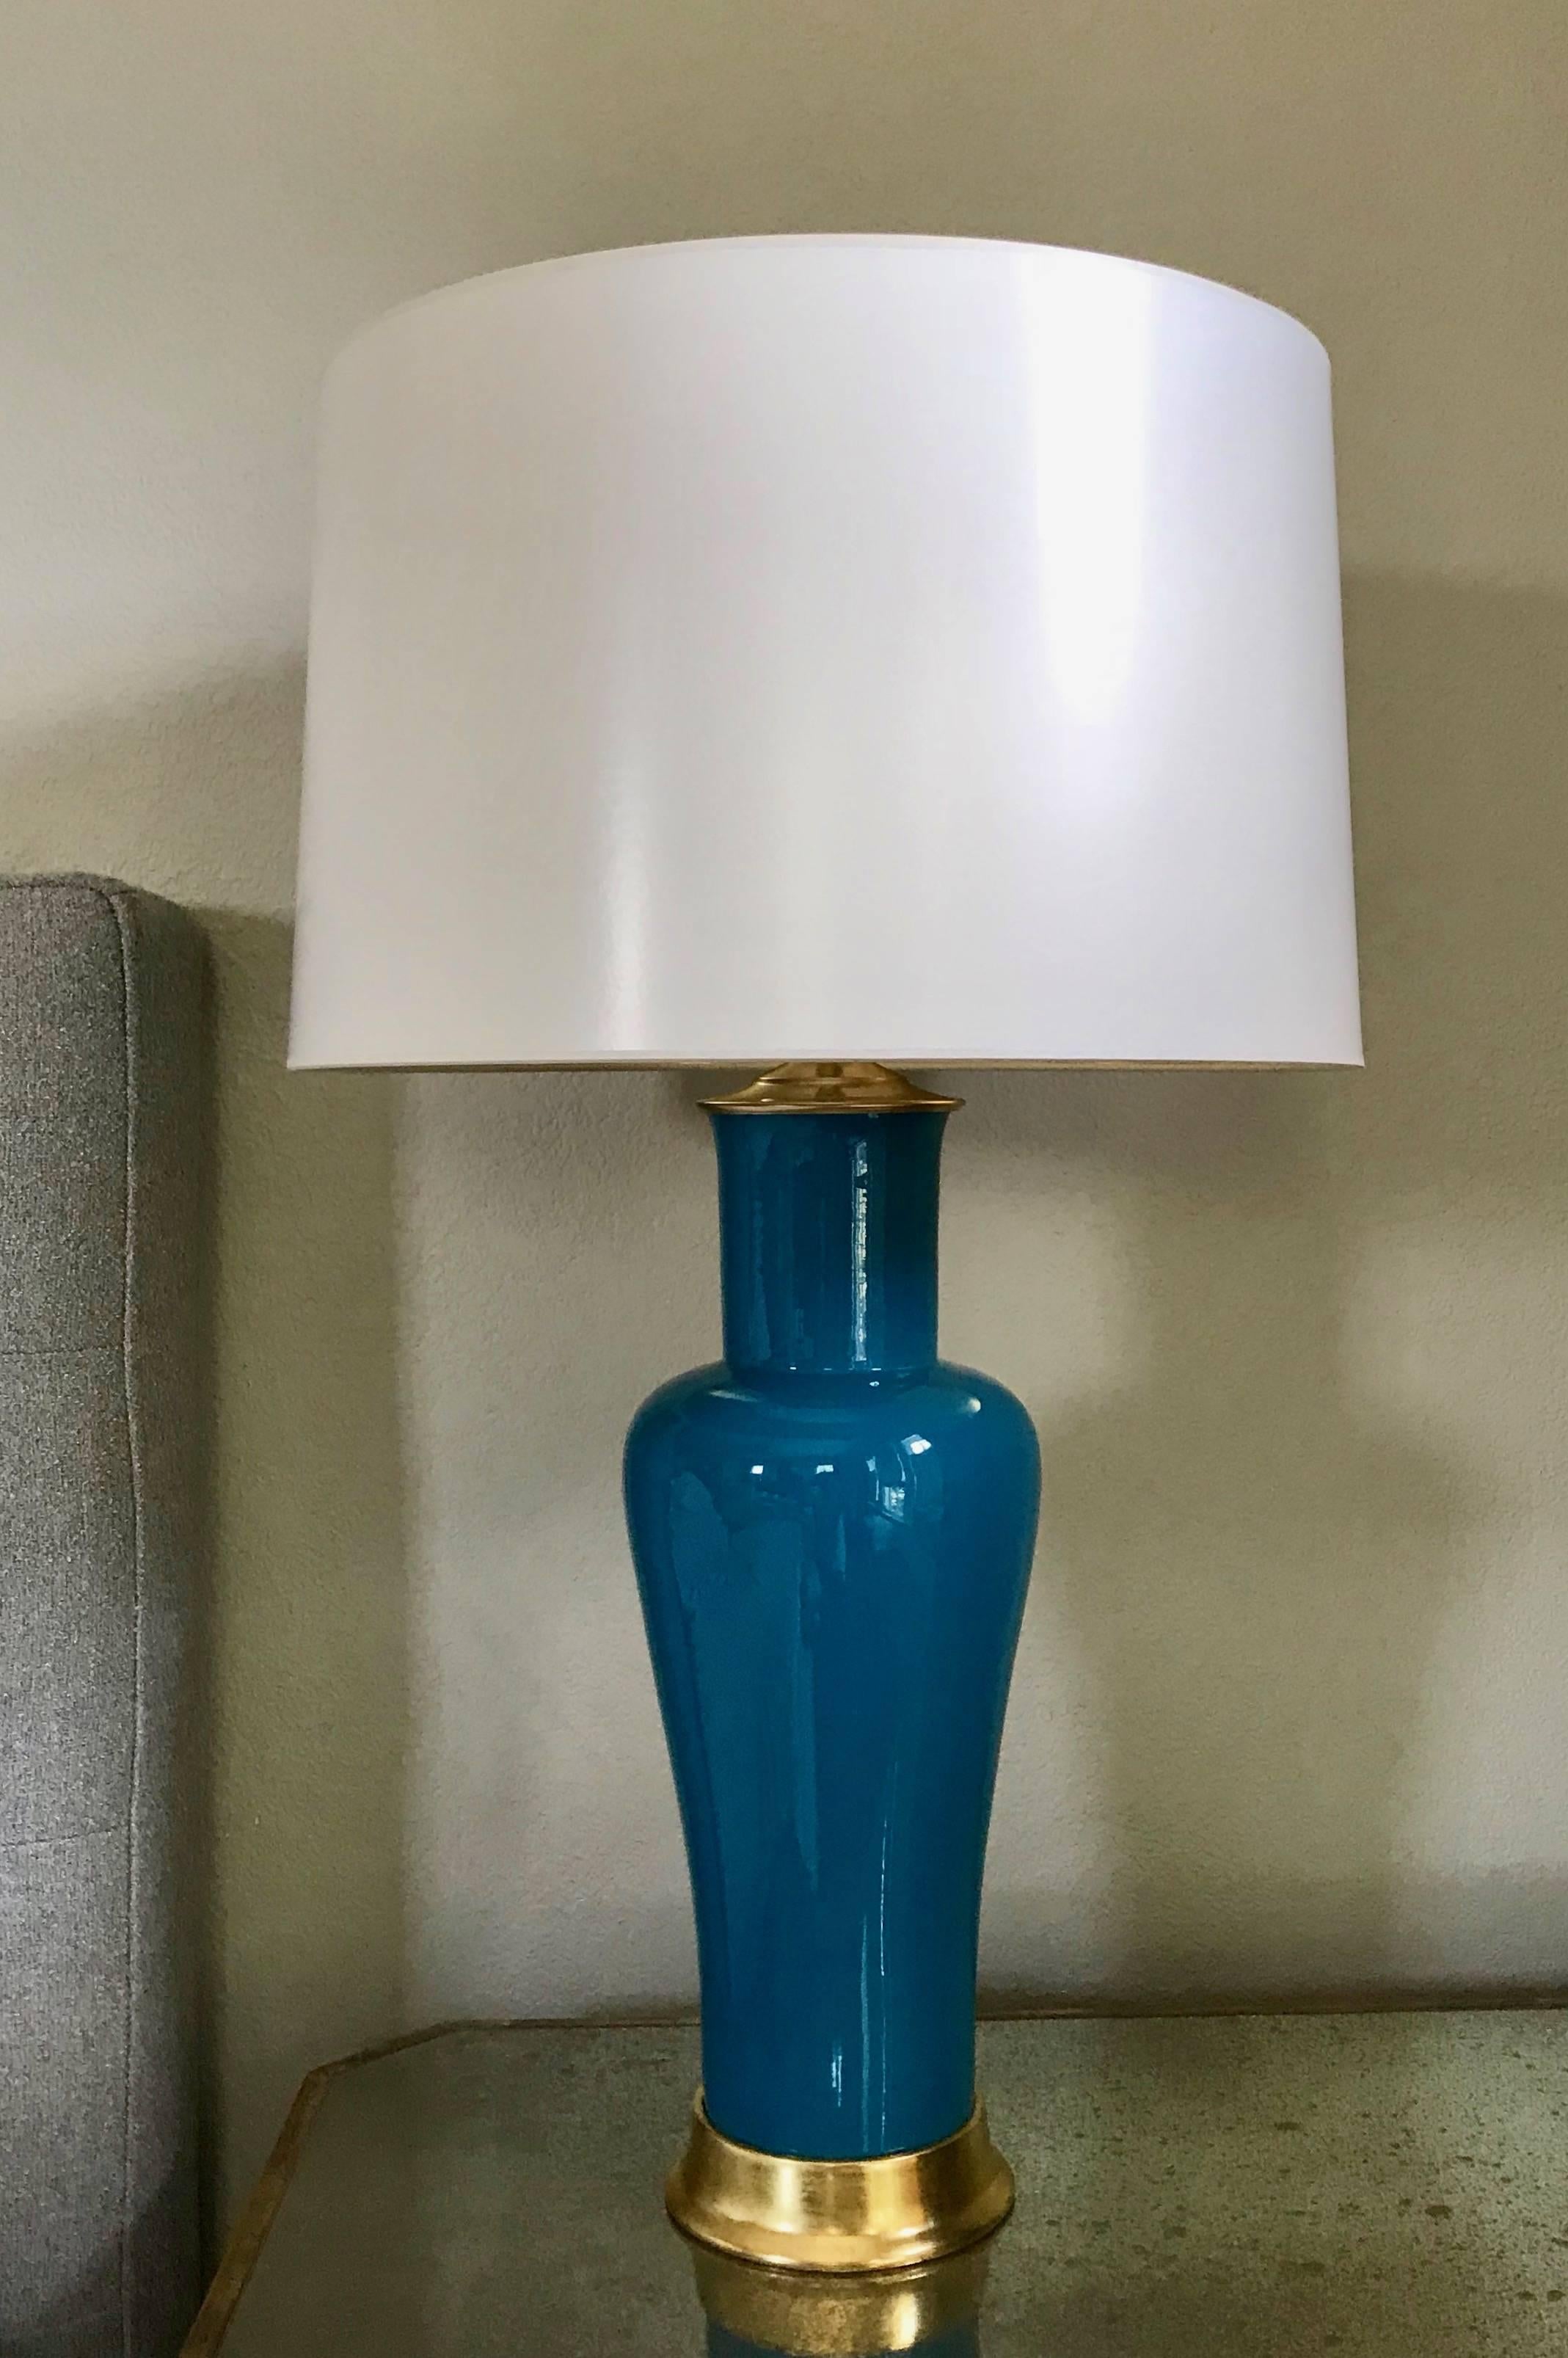 Pair of hand thrown porcelain lamps in a vibrant cobalt blue reflective glaze with custom 23-karat water gilt turned wood bases. Wired for US with on/off pull chain sockets, brass fittings and French style rayon covered twisted cord. Weighted bases